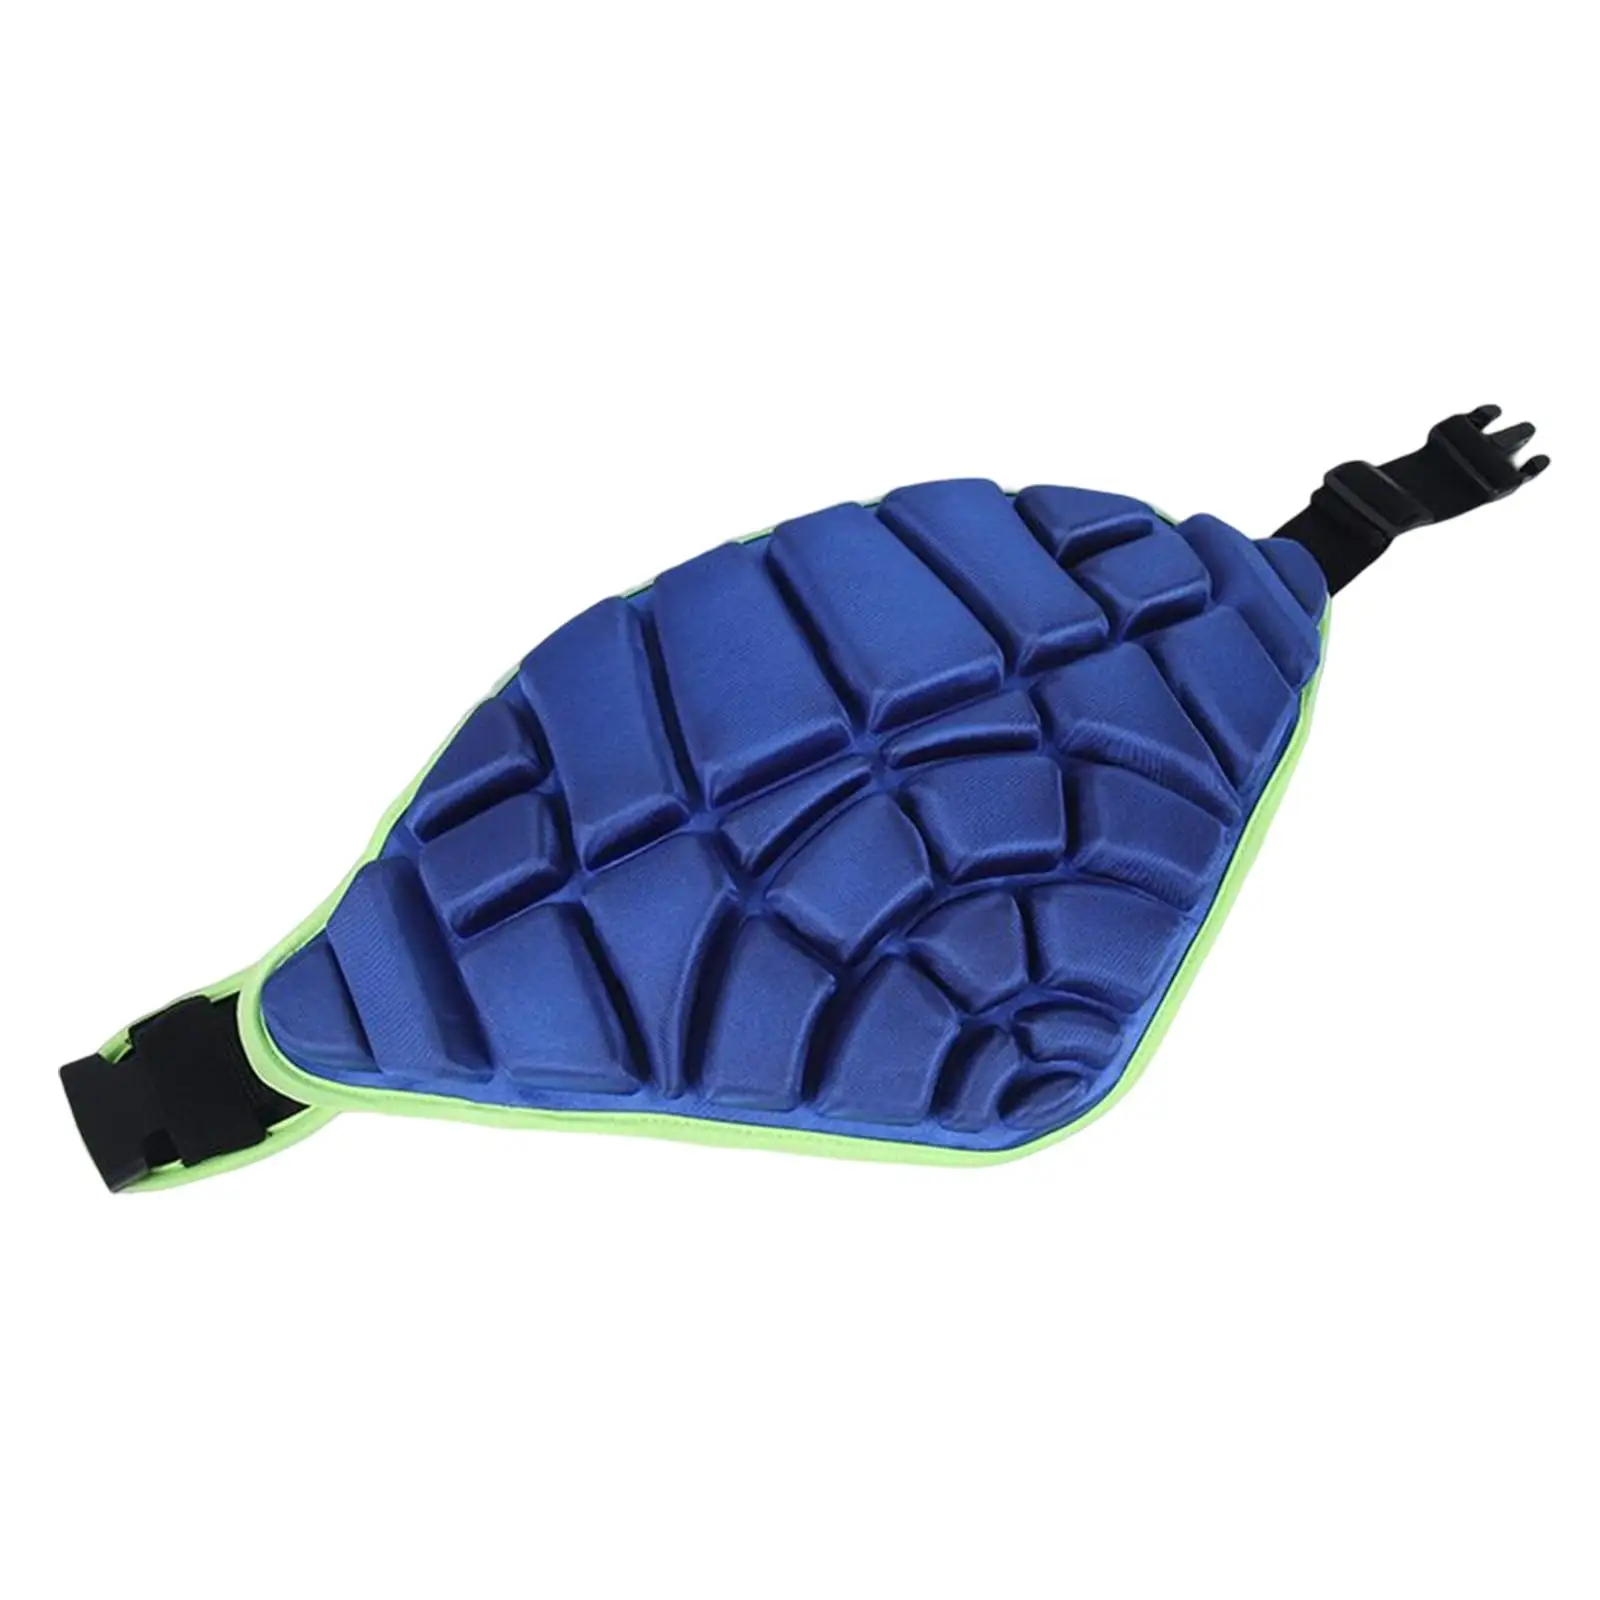 3D Padded Protection Hip Protection Easy to Take On and Off Butt Pad for Skateboarding